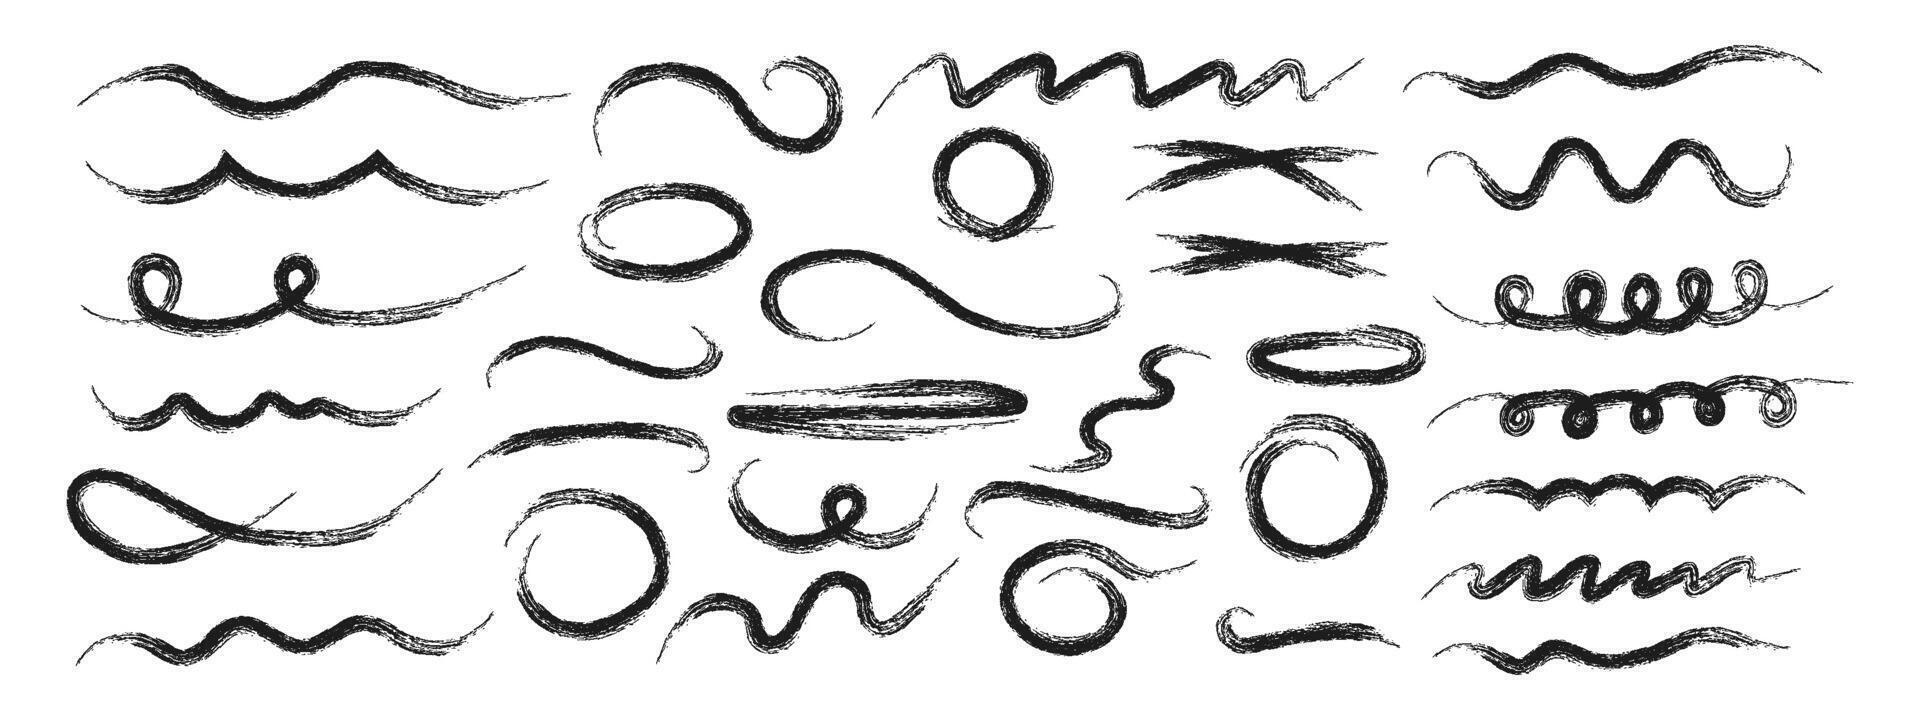 Hand drawn wavy strokes, crosshatching ovals. Decorative vector graphic elements. Black brush strokes and pencil strokes. Typographic strokes and stroke tails.